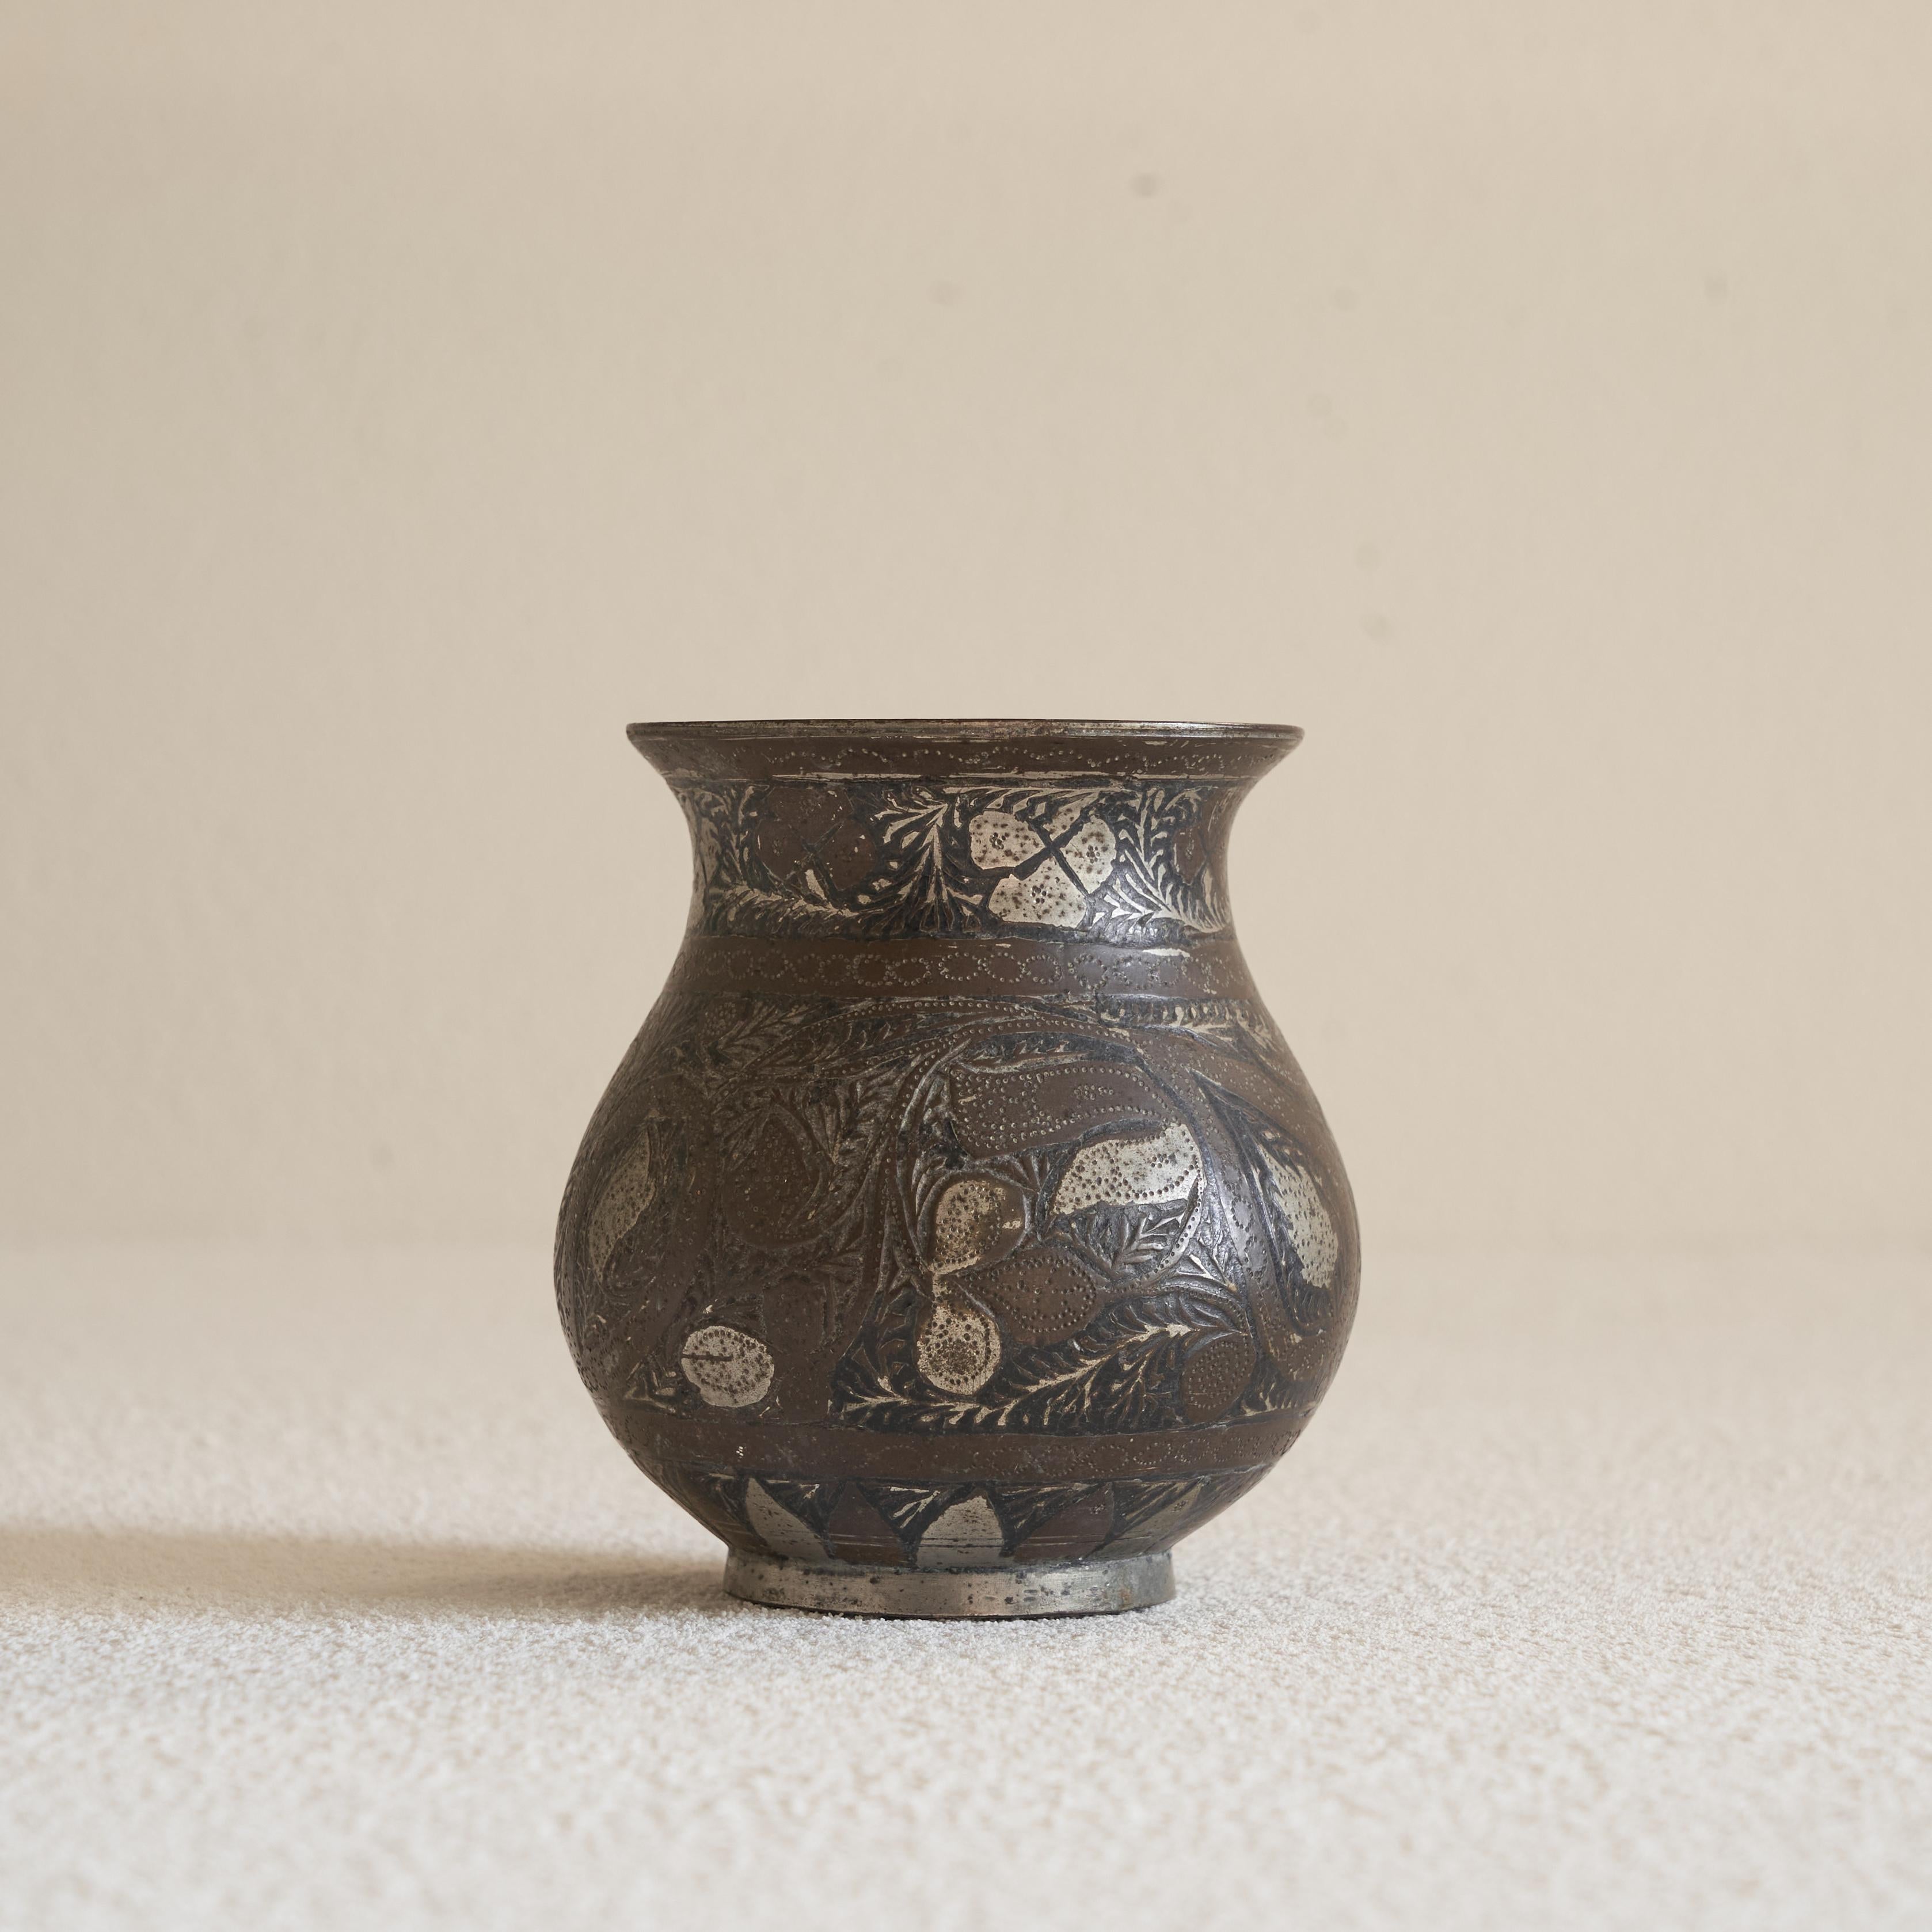 Other Antique Small Pyriform Shaped 'Bidri' Vase For Sale